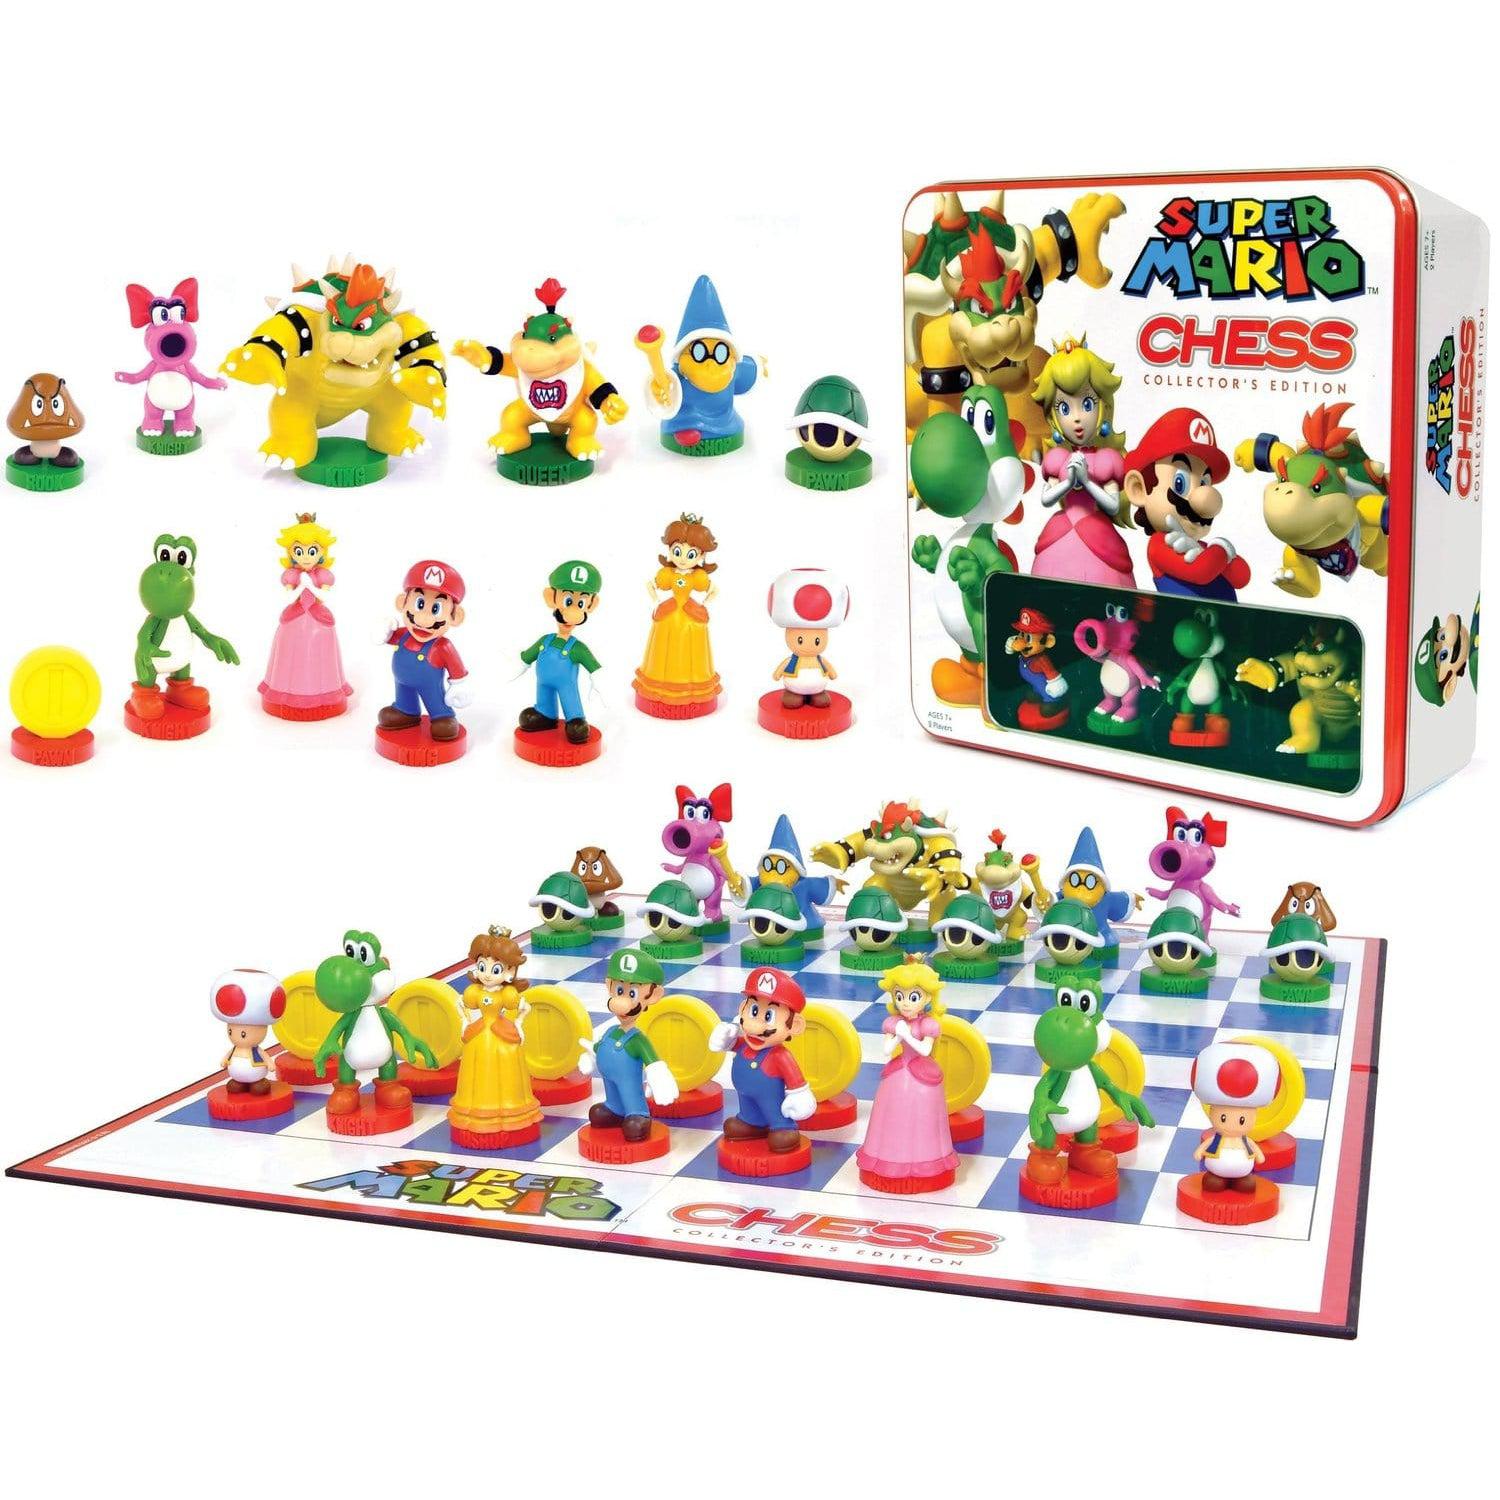 USAopoly-Super Mario Chess Set-CH005-191-Legacy Toys